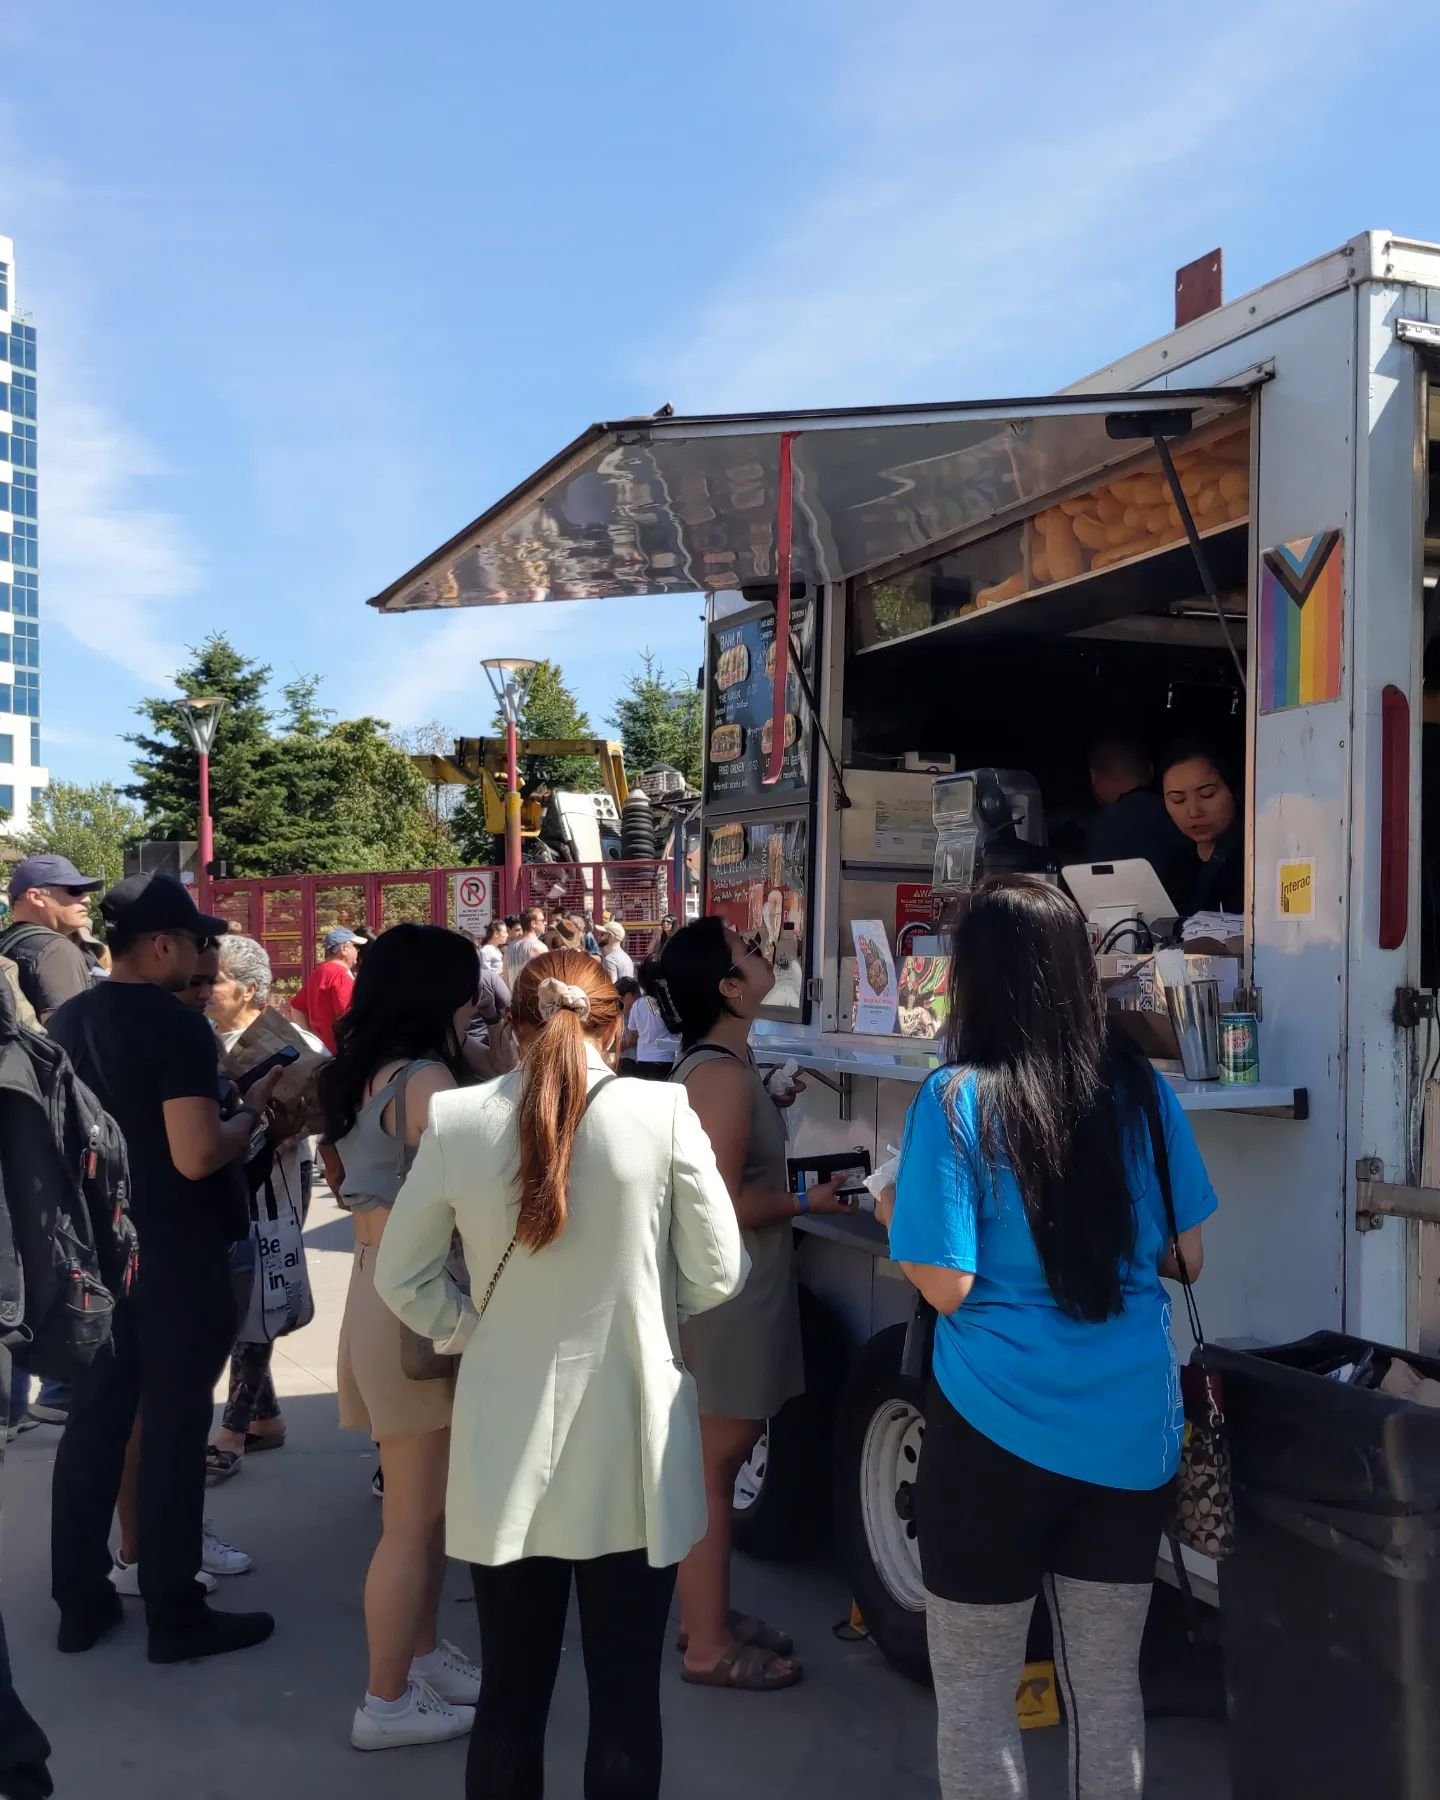 Spot us at Concord Pacific Dragon Boats tomorrow from 9-6pm

#dragonboats #concordpacificdragonboats #concordpacific #vancouverfoodtruck #vancouverfoodie #vancouvereats #yvreats